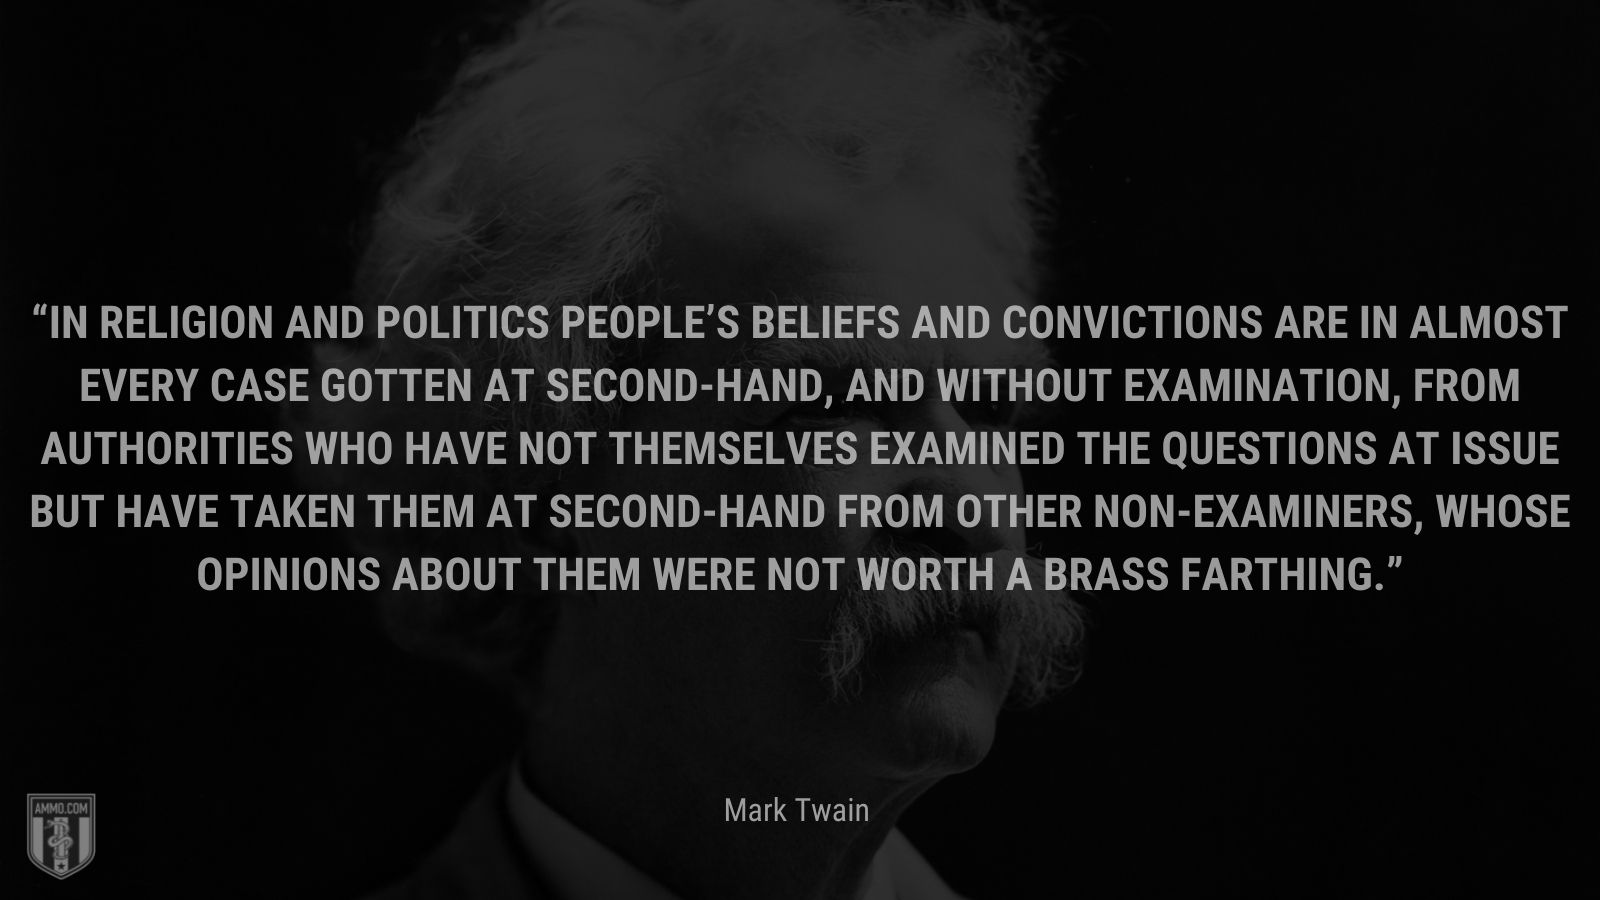 “In religion and politics people’s beliefs and convictions are in almost every case gotten at second-hand, and without examination, from authorities who have not themselves examined the questions at issue but have taken them at second-hand from other non-examiners, whose opinions about them were not worth a brass farthing.” - Autobiography of Mark Twain